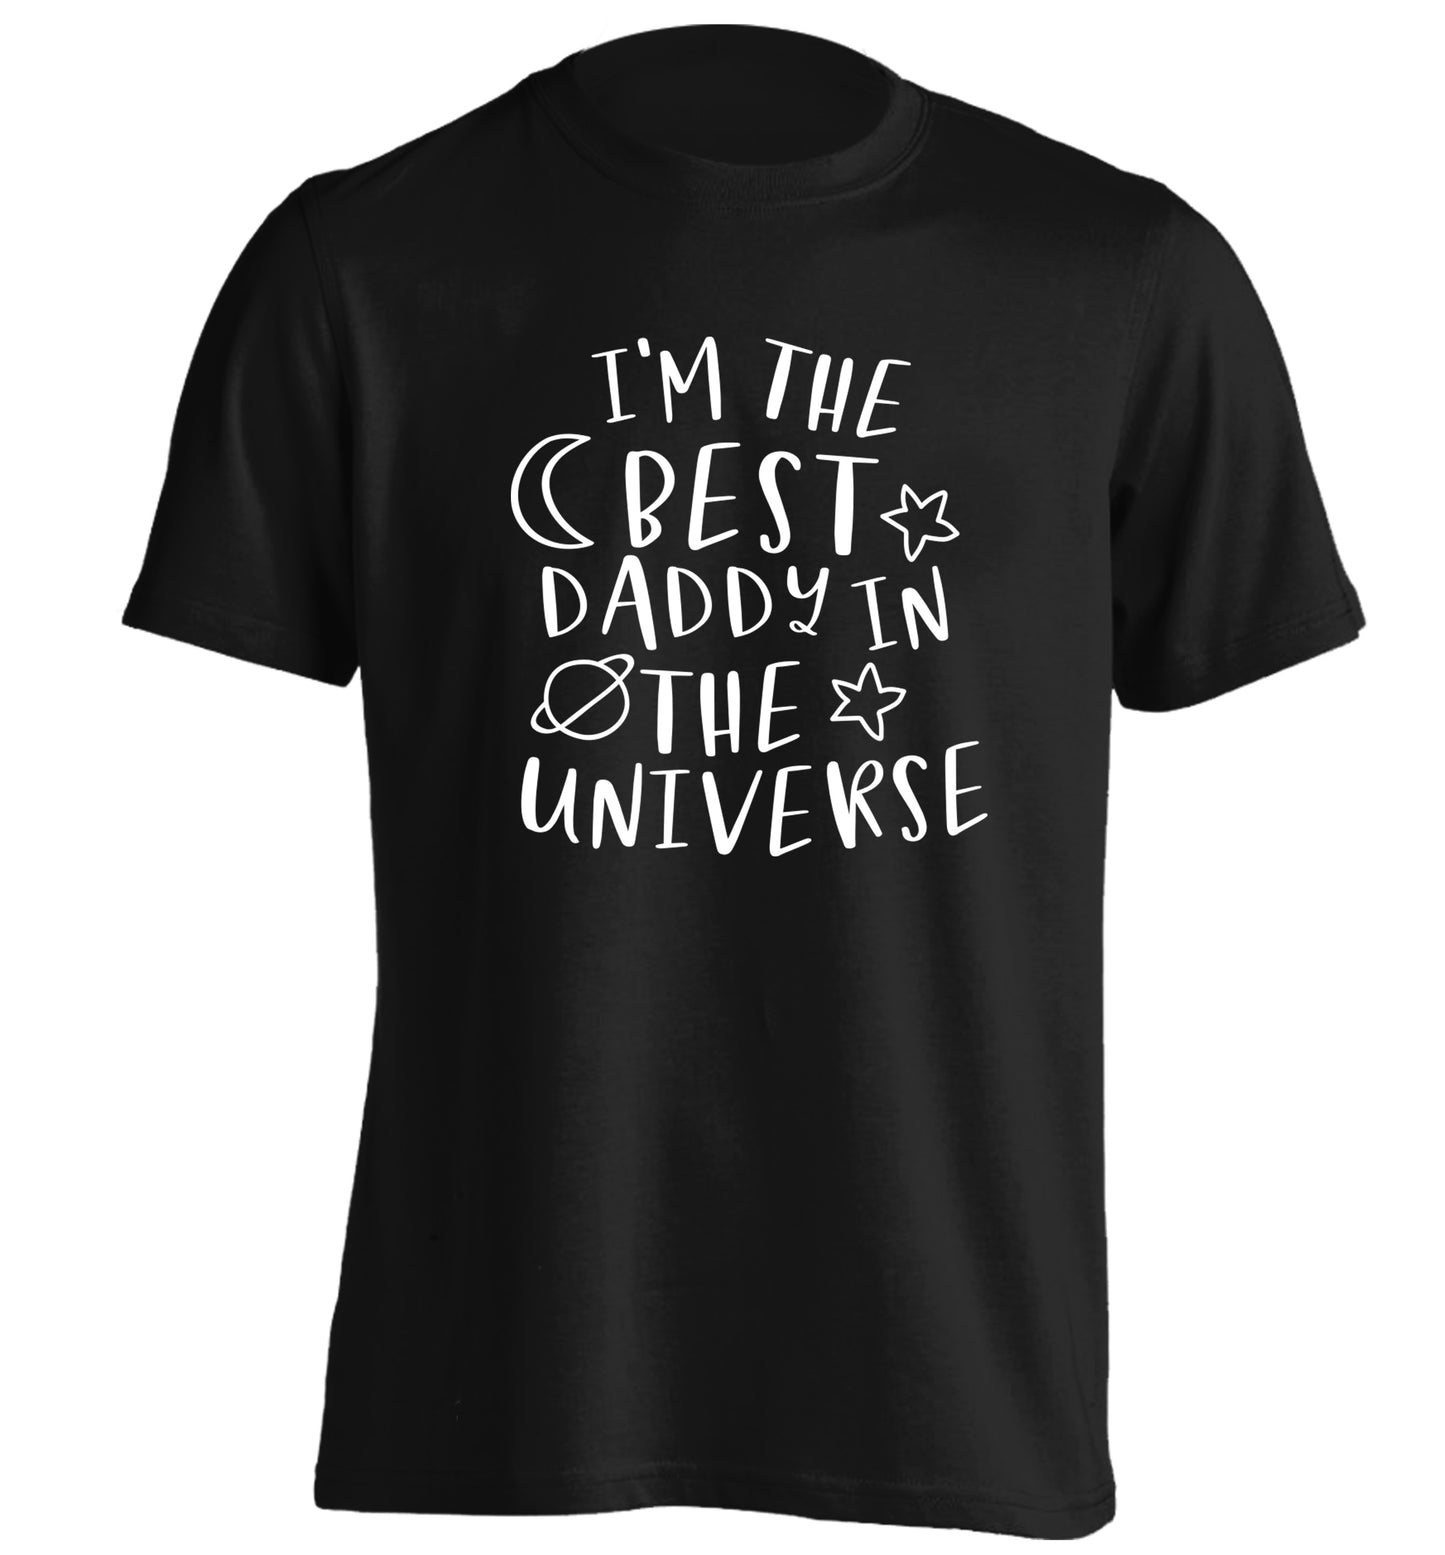 I'm the best daddy in the universe adults unisex black Tshirt 2XL